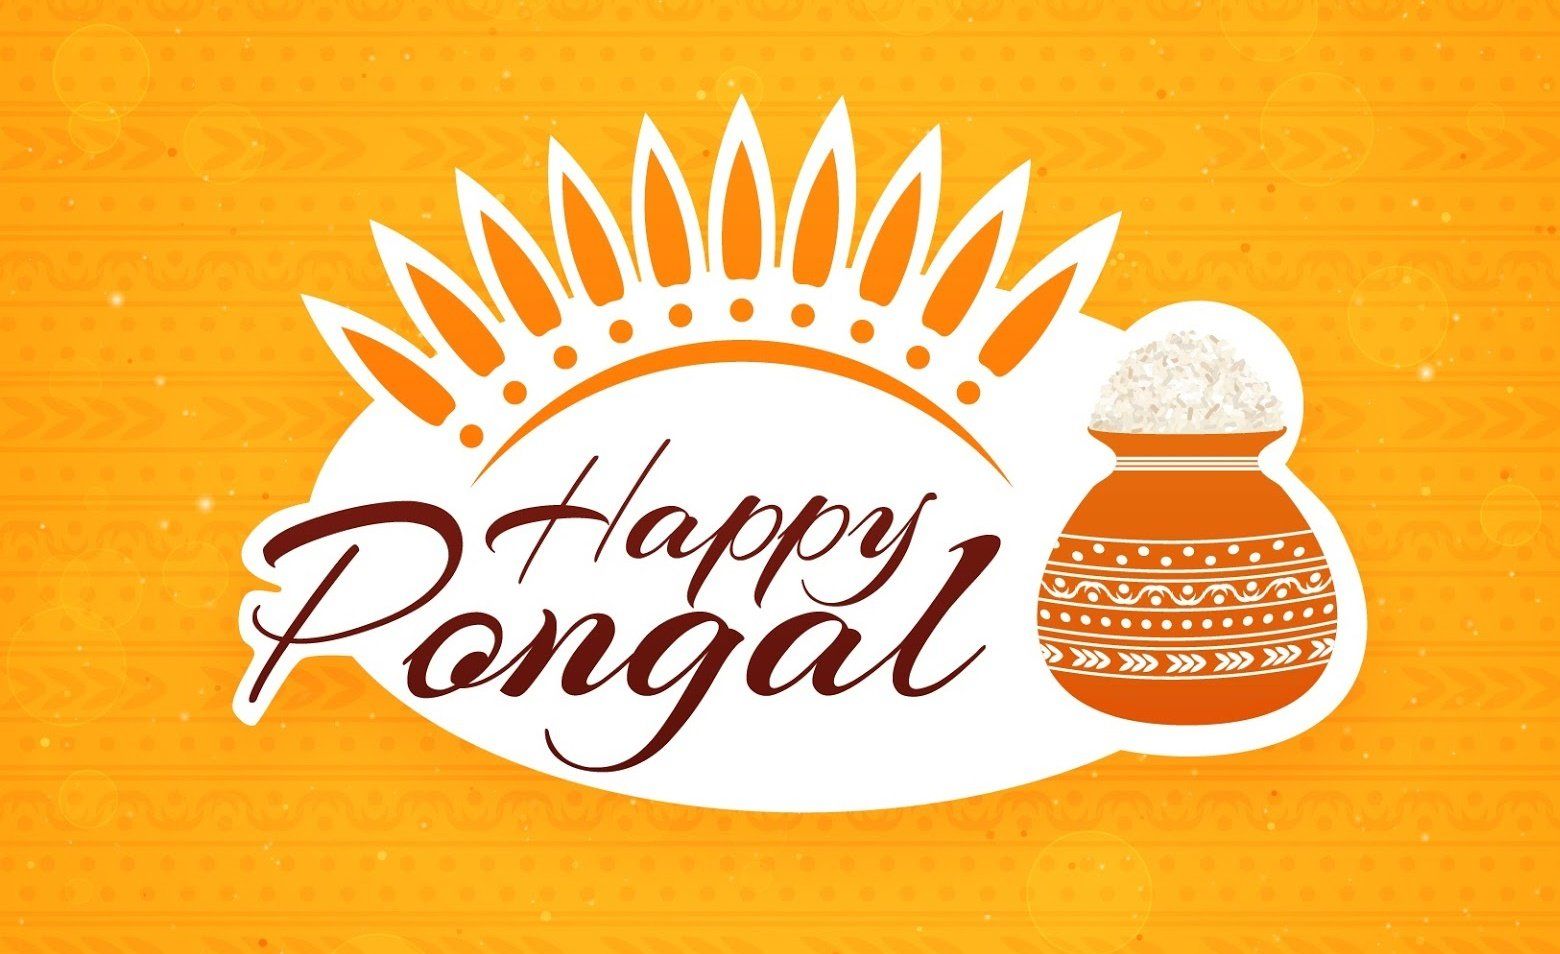 Happy Pongal Wishes, Image And Photo Collection 2021